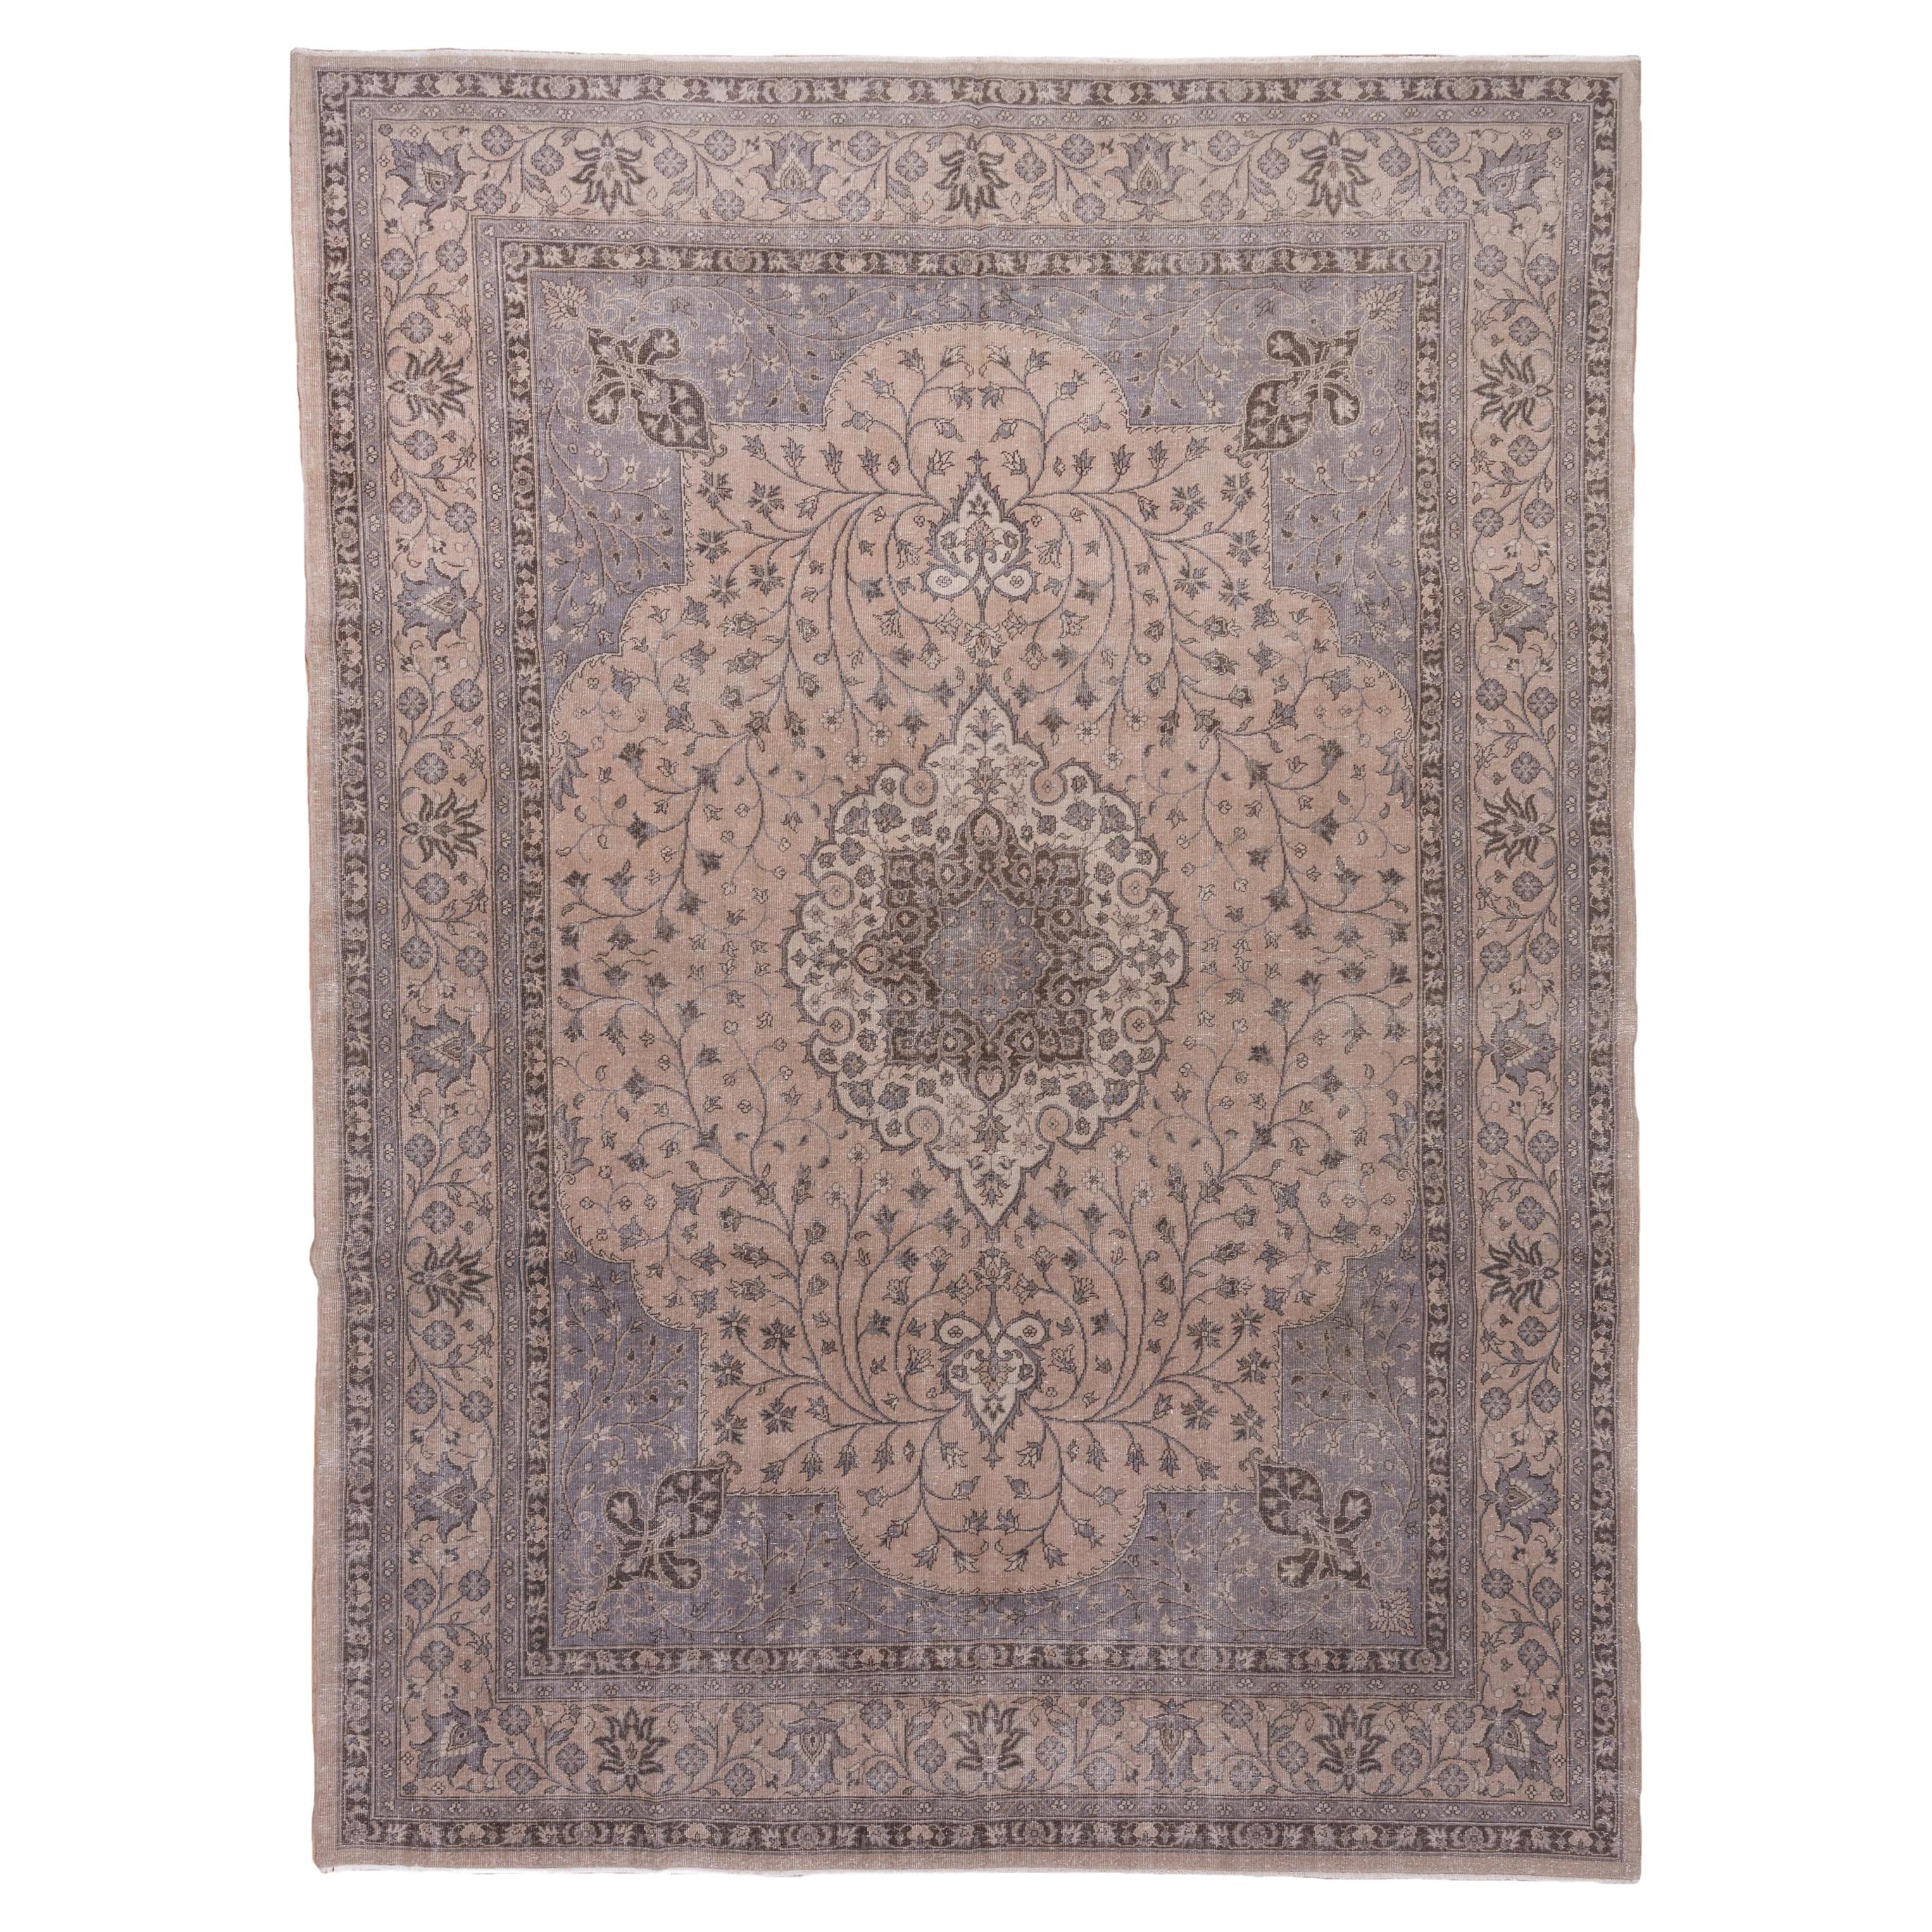 Antique Turkish Sivas Rug, Light Brown Field, Lavender and Gray Outer Field